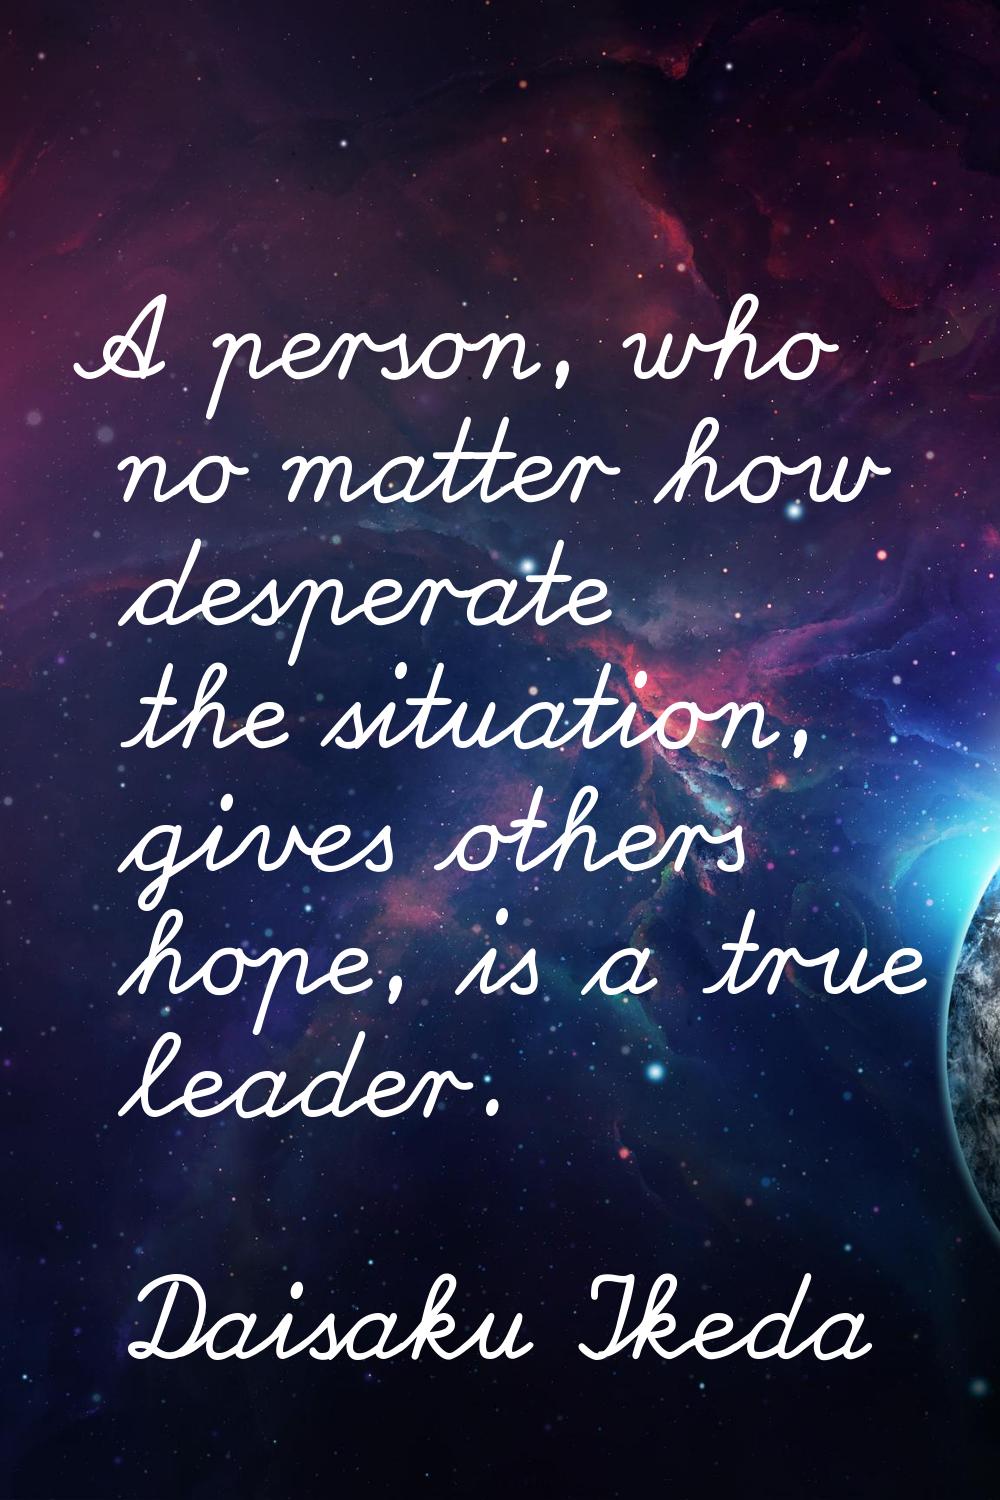 A person, who no matter how desperate the situation, gives others hope, is a true leader.